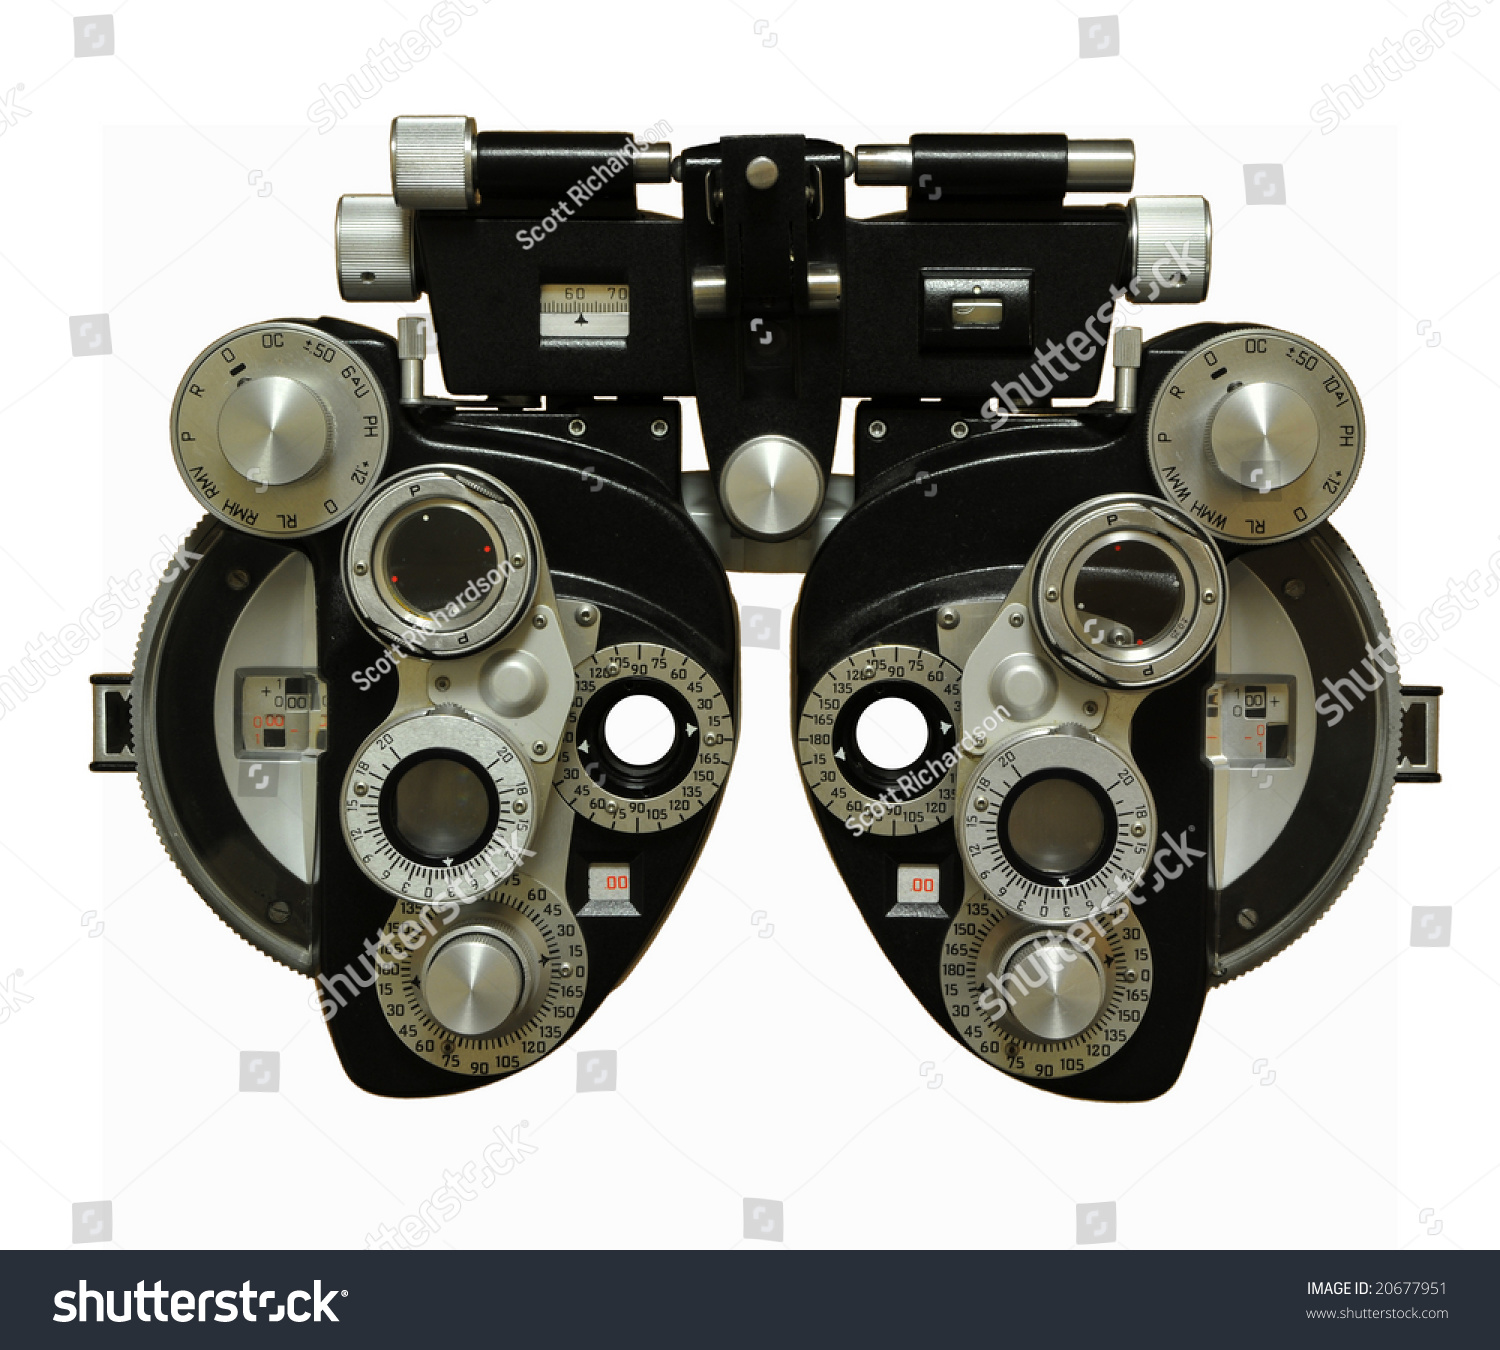 Phoropter(Isolated) Stock Photo 20677951 : Shutterstock